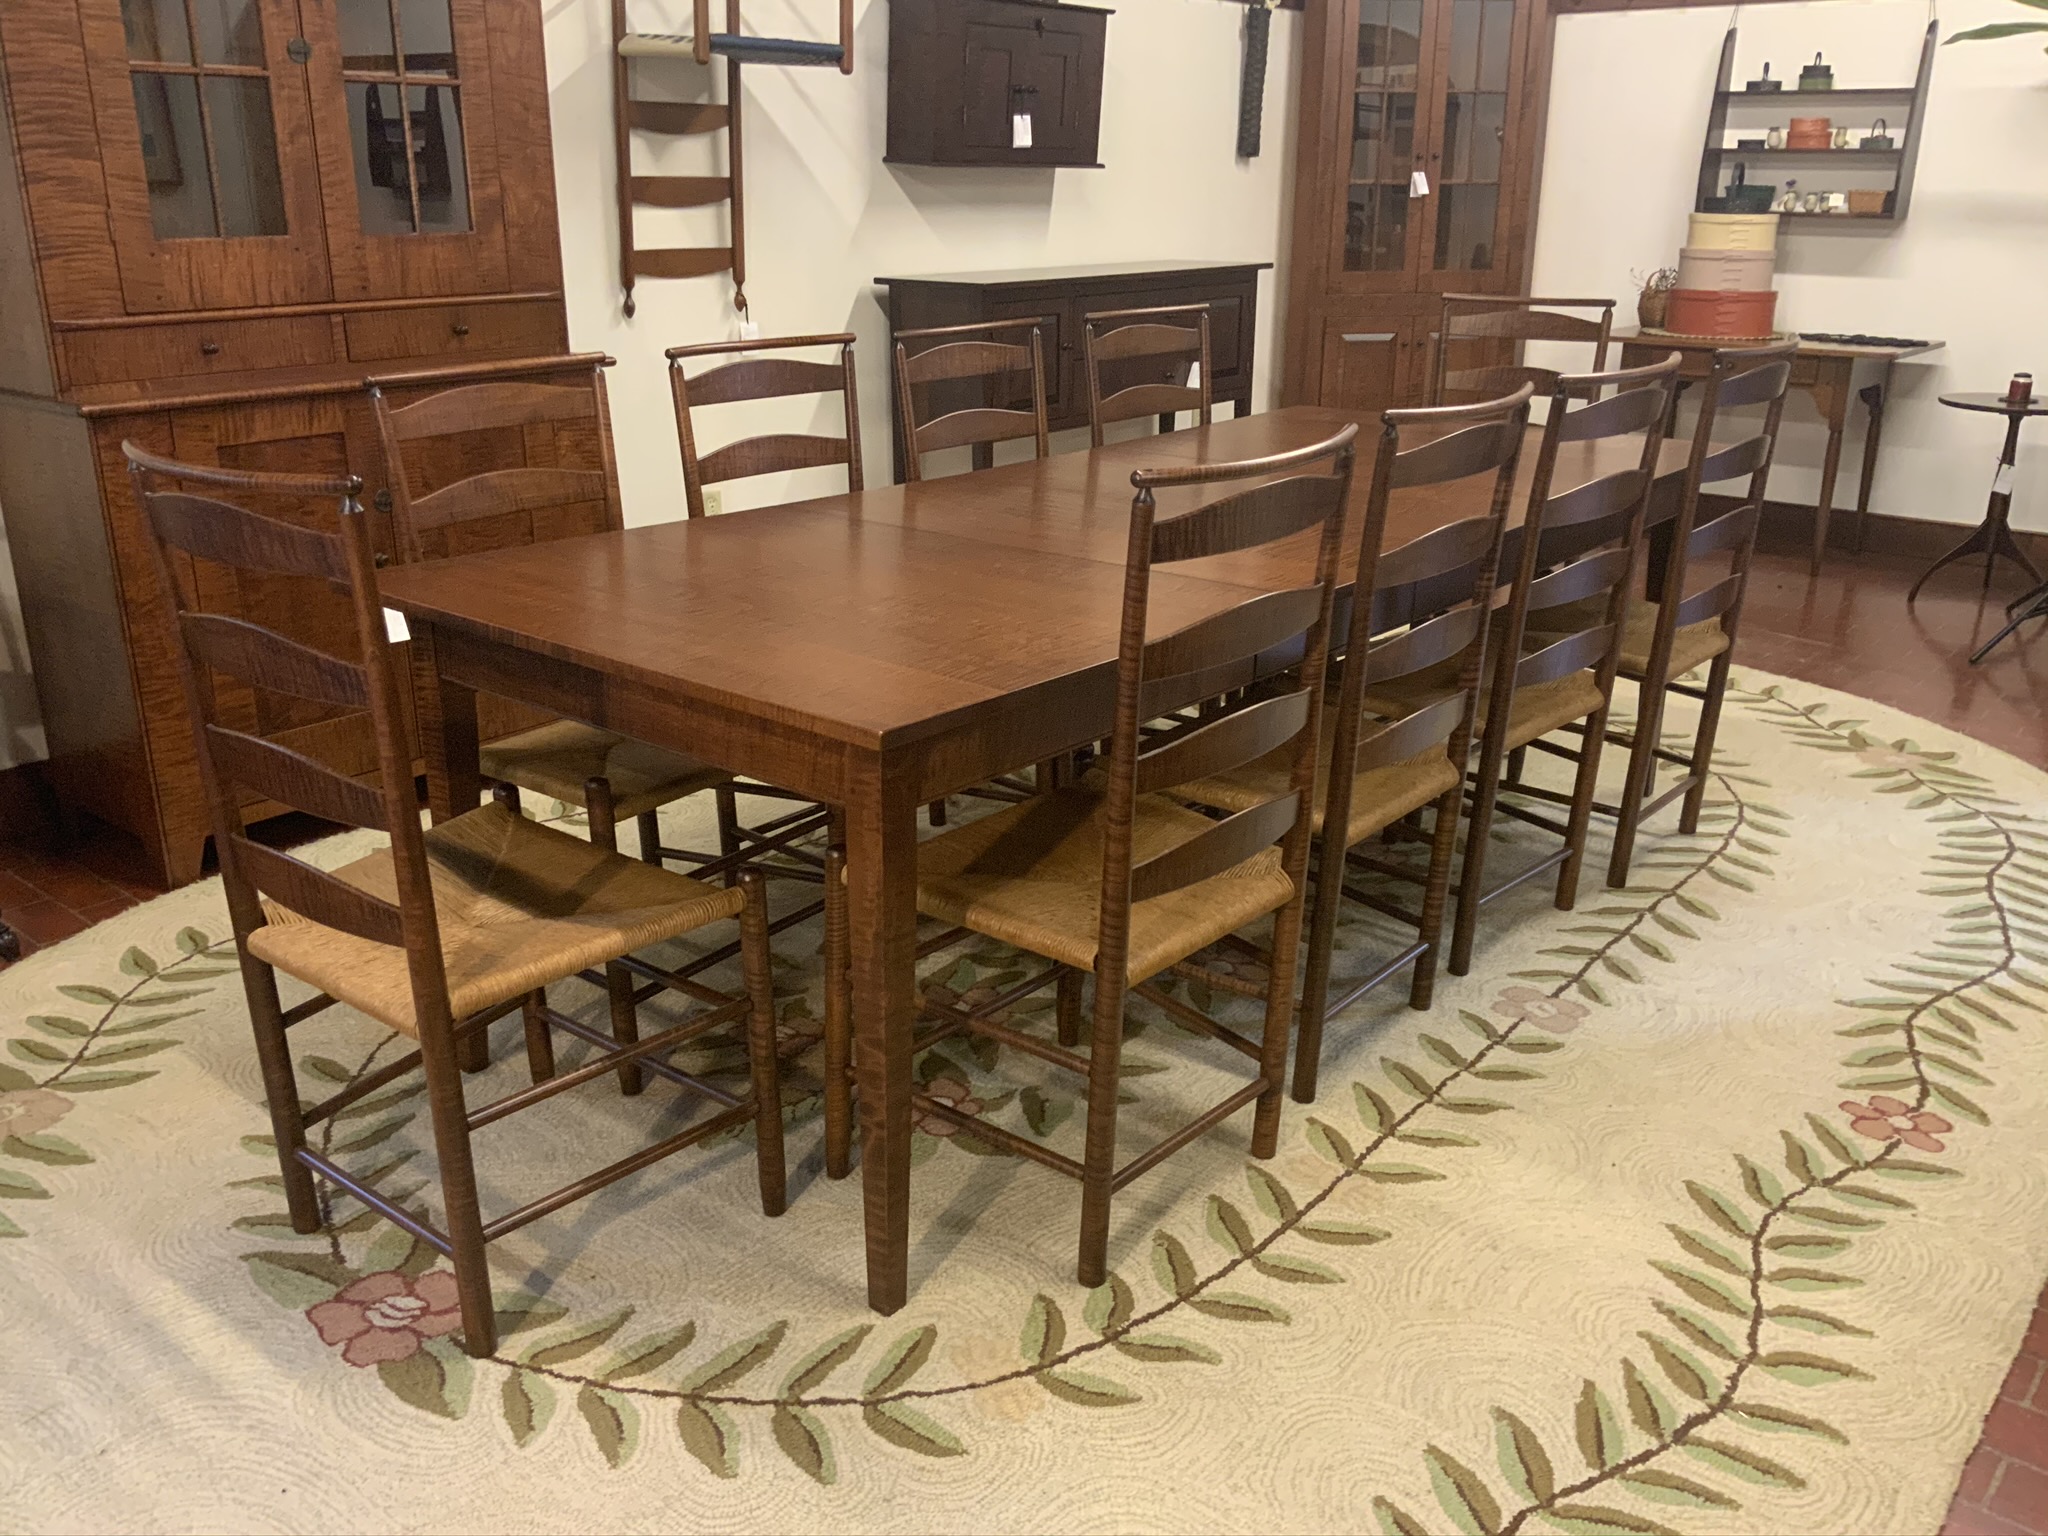 Tiger Maple Table 10 Chair Set, Maple Wood Dining Room Set